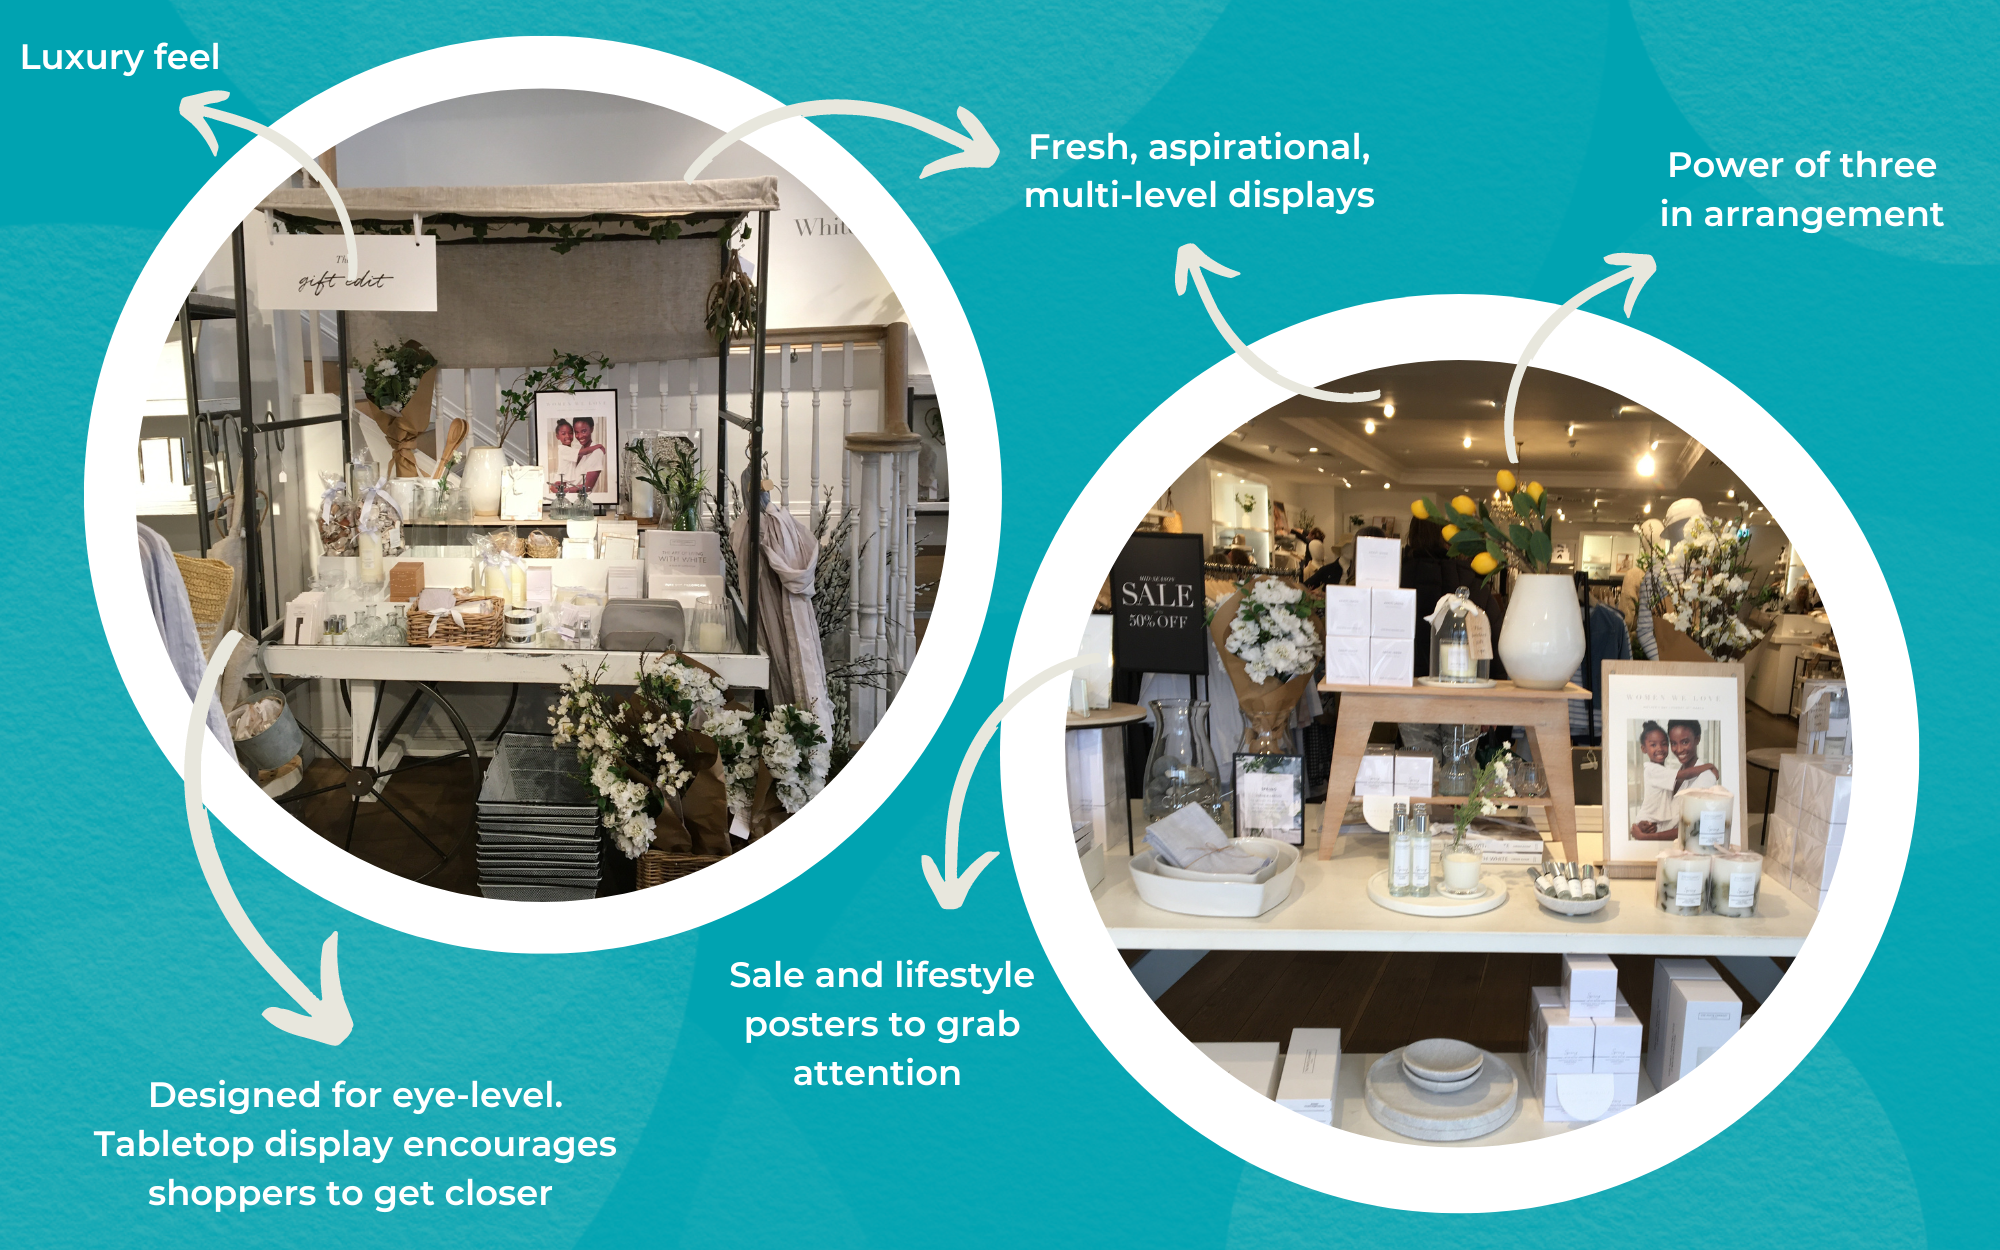 In-store tabletop retail display using the power of three in product arrangement and fresh, neutral tones for a luxury feel.